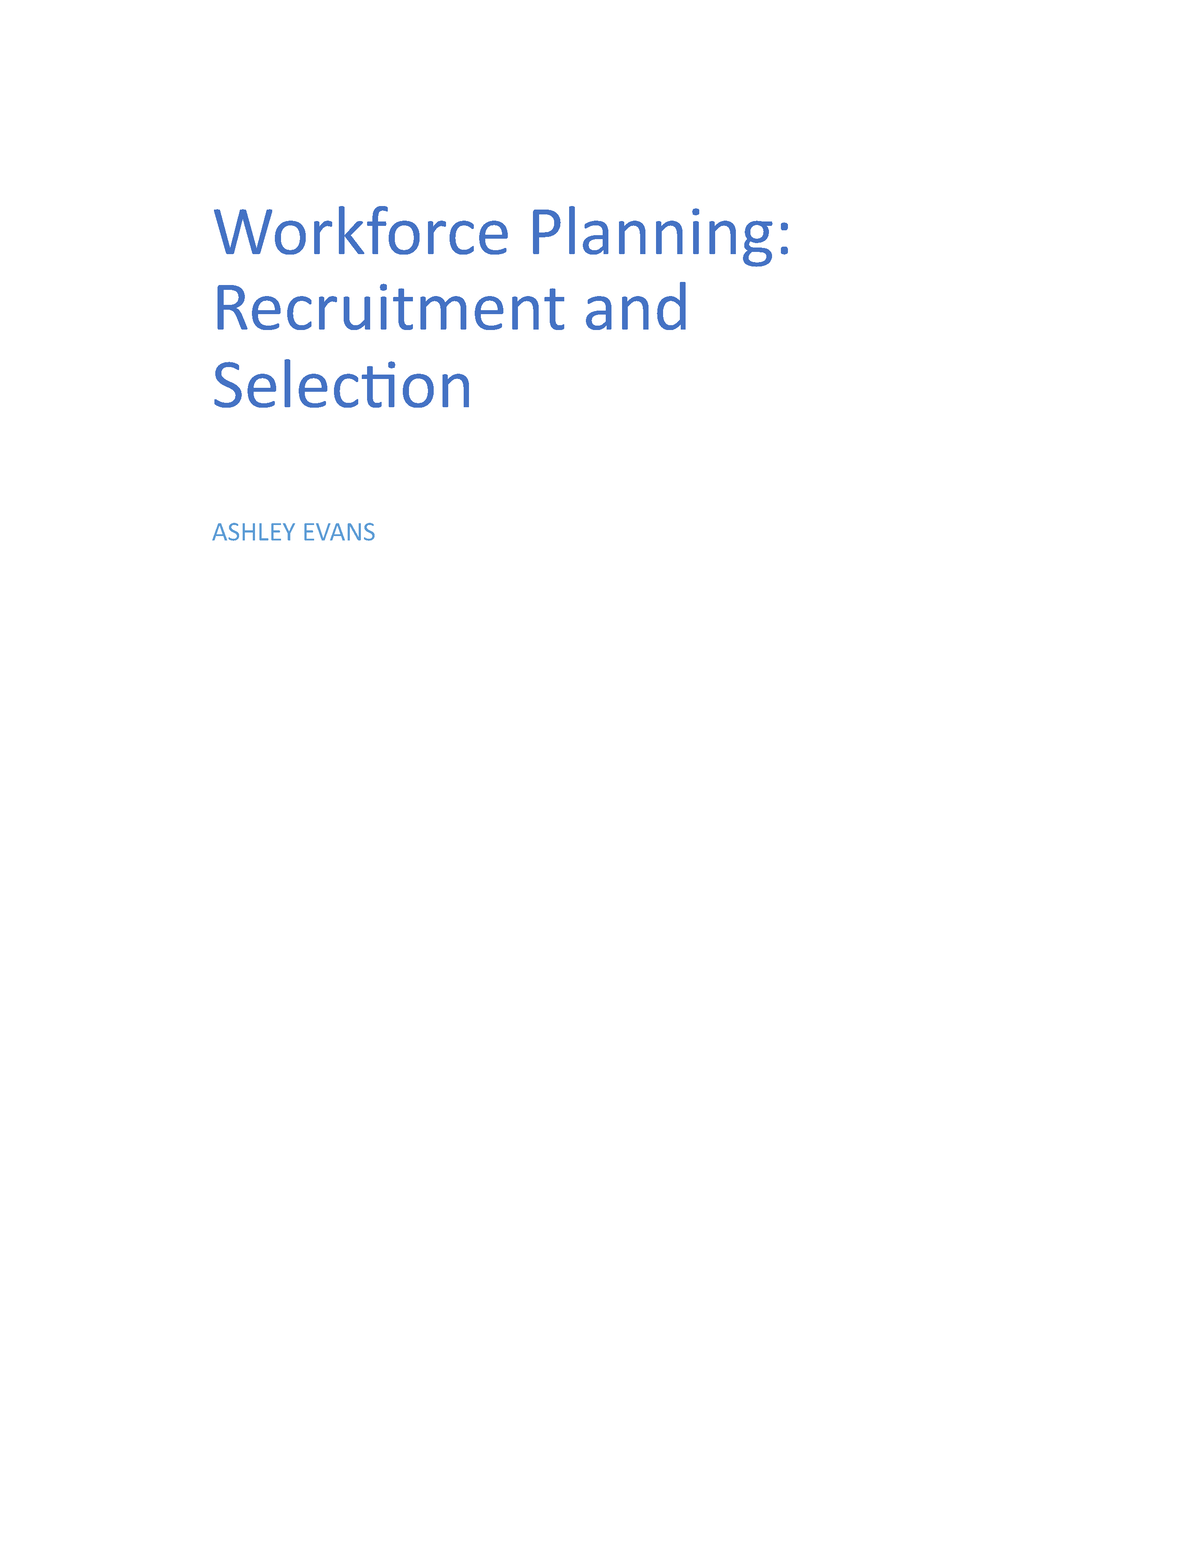 C234 Task 1 Essay Workforce Planning Recruitment And Selection